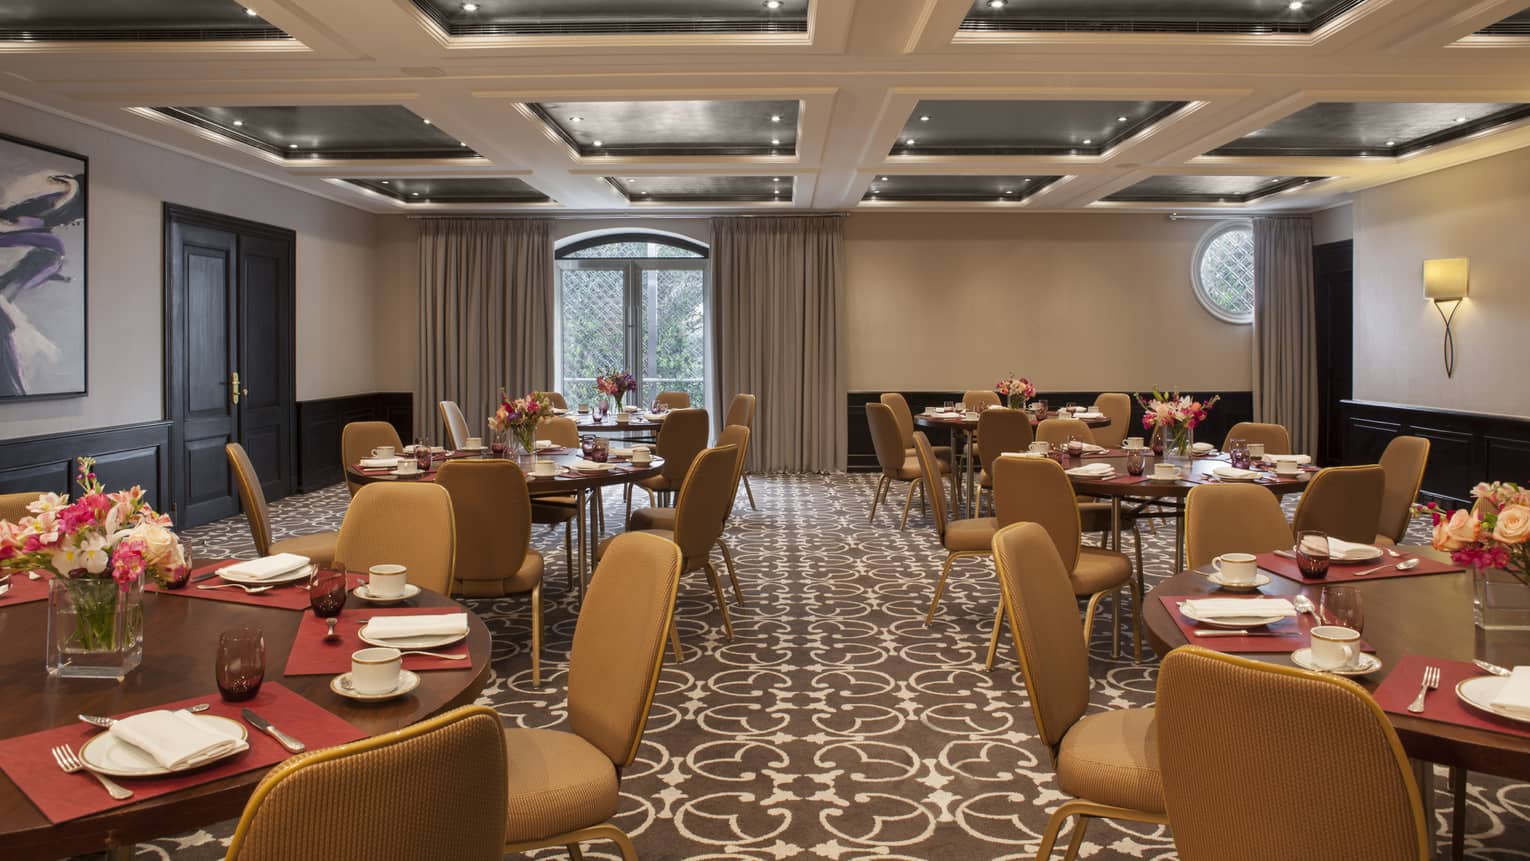 Blas Meeting Room round tables with tan chairs, panel ceiling